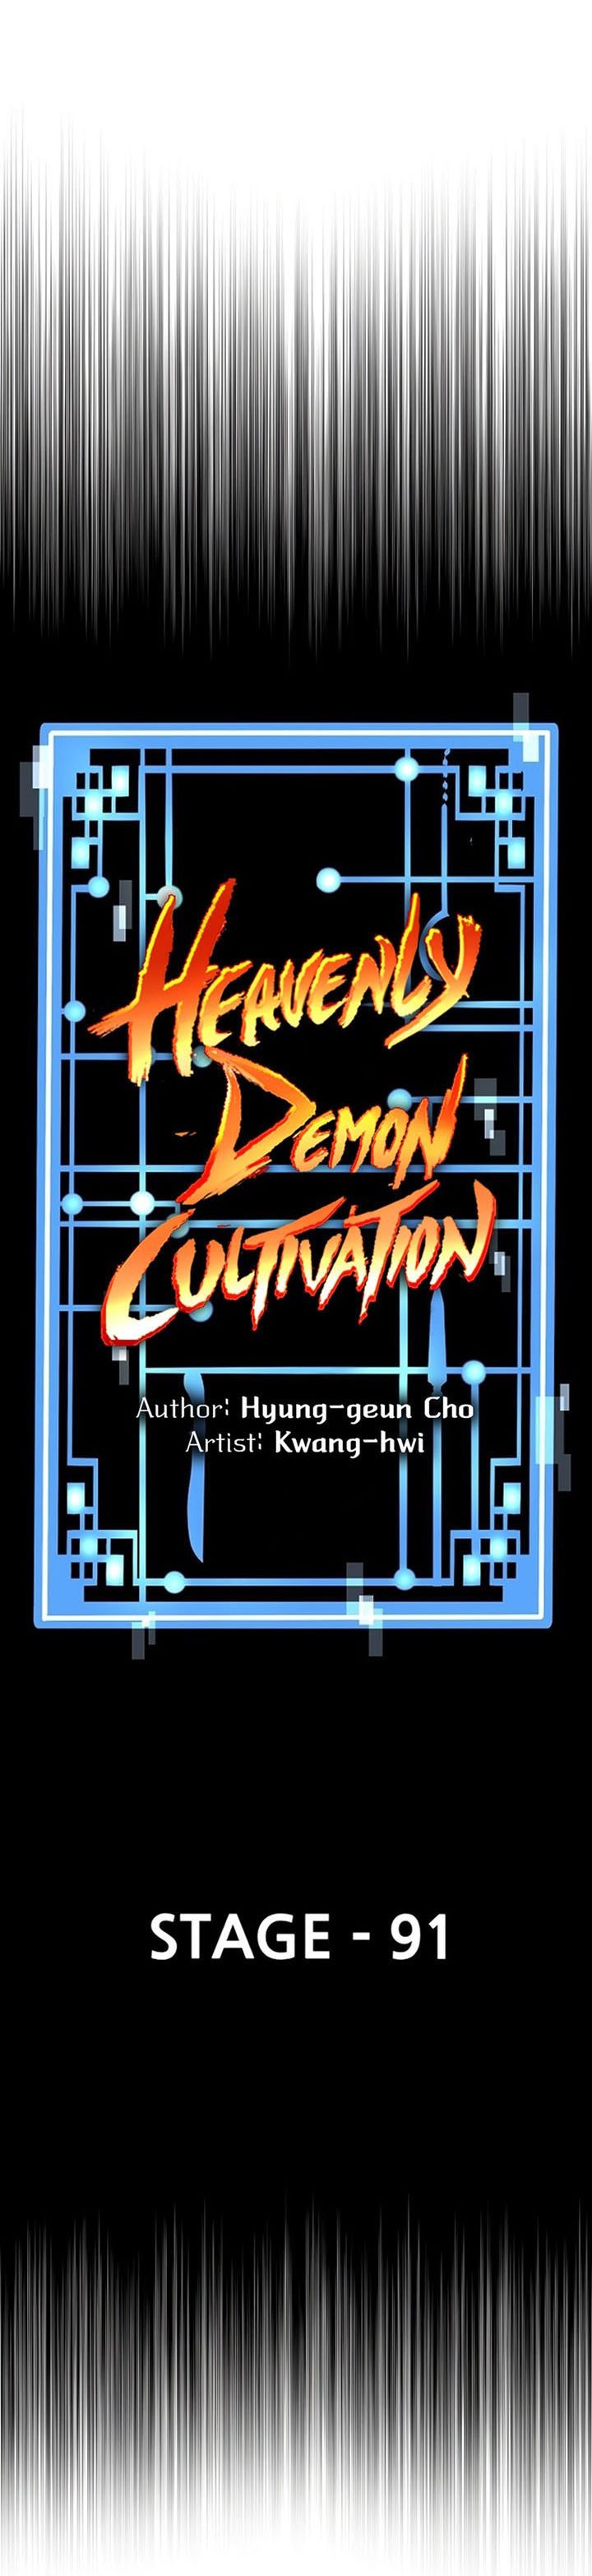 Heavenly Demon Cultivation Simulation Chapter 91